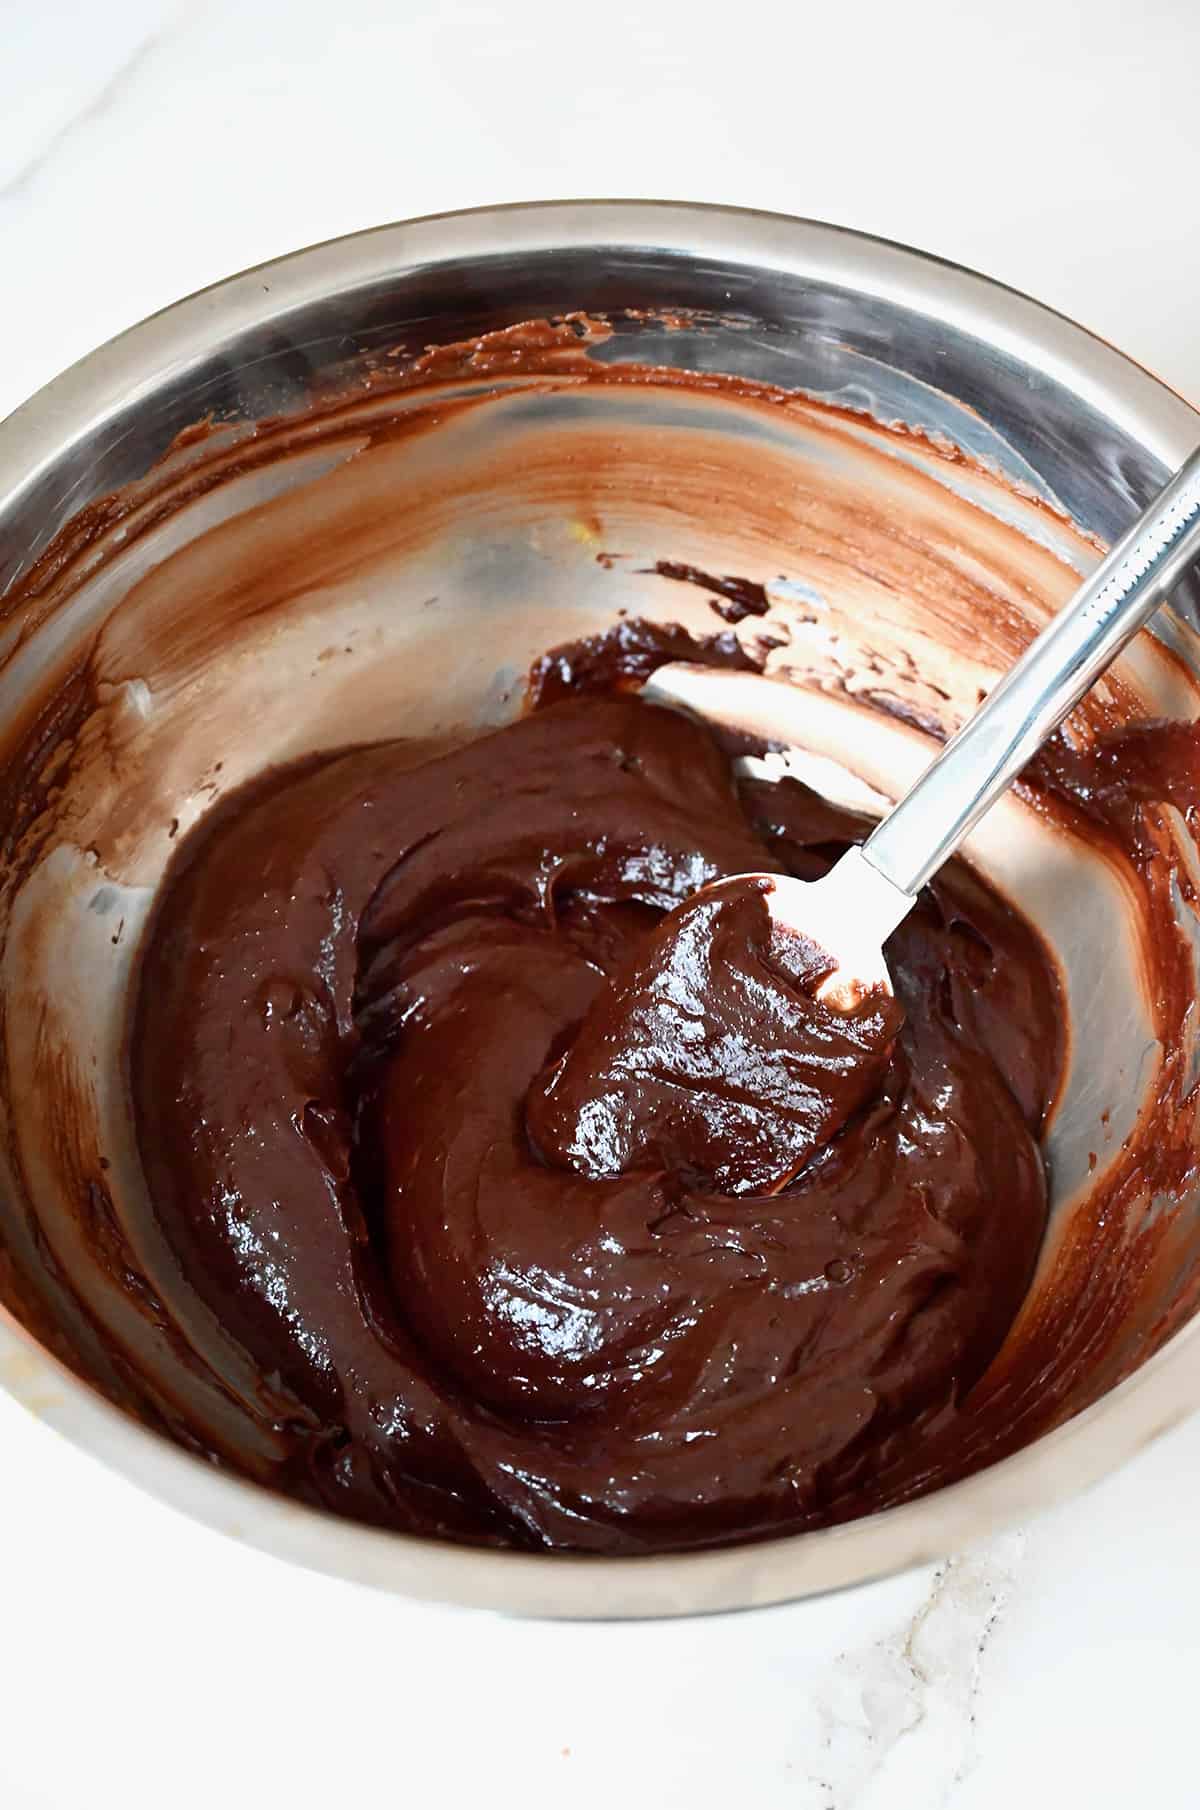 The melted chocolate mixture in a stainless steel mixing bowl with a rubber resting against its side.